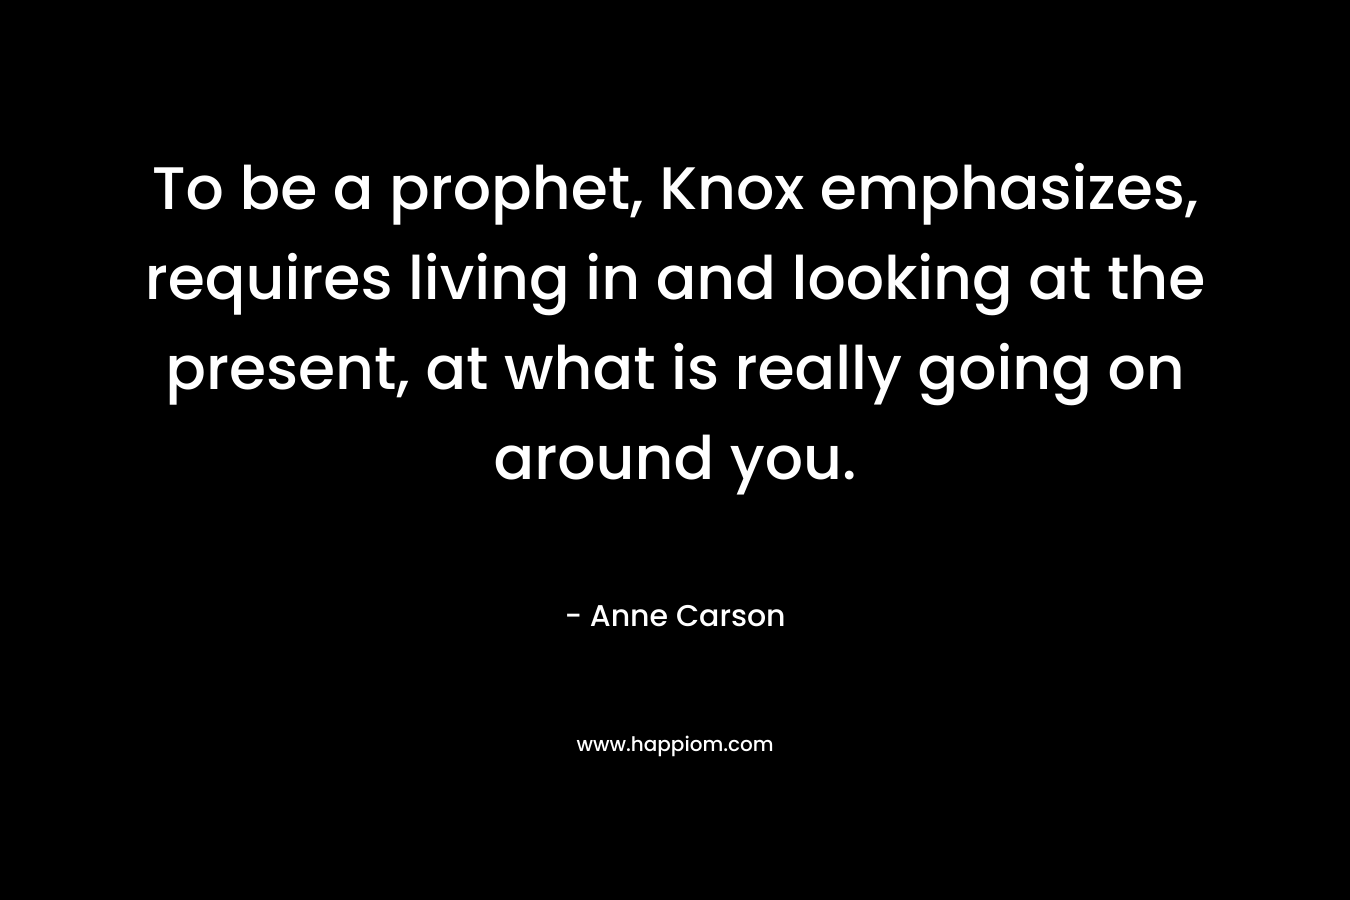 To be a prophet, Knox emphasizes, requires living in and looking at the present, at what is really going on around you.